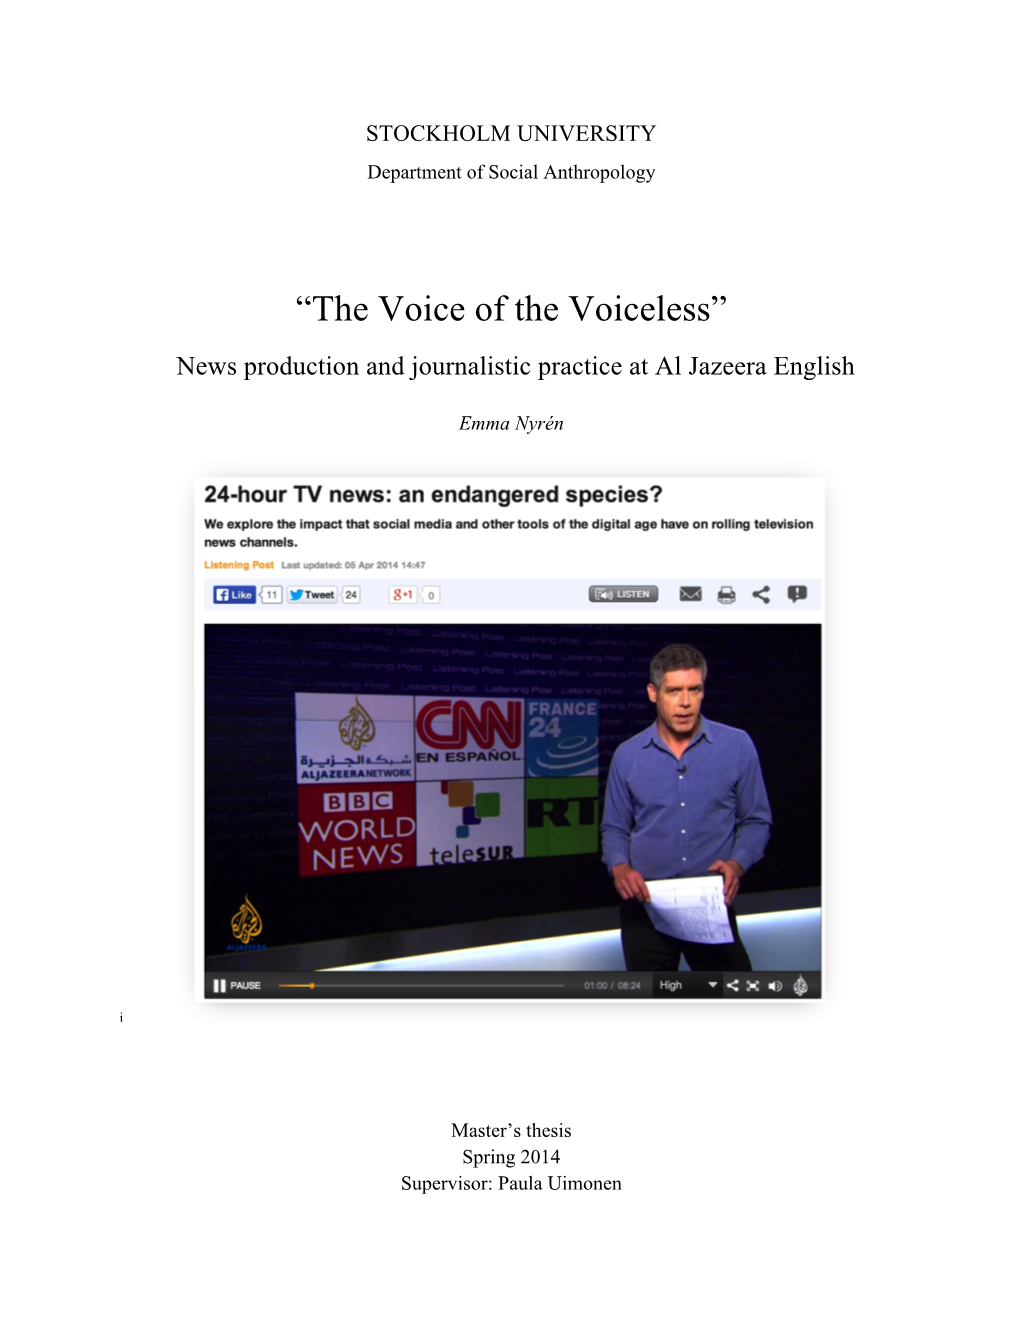 “The Voice of the Voiceless” News Production and Journalistic Practice at Al Jazeera English